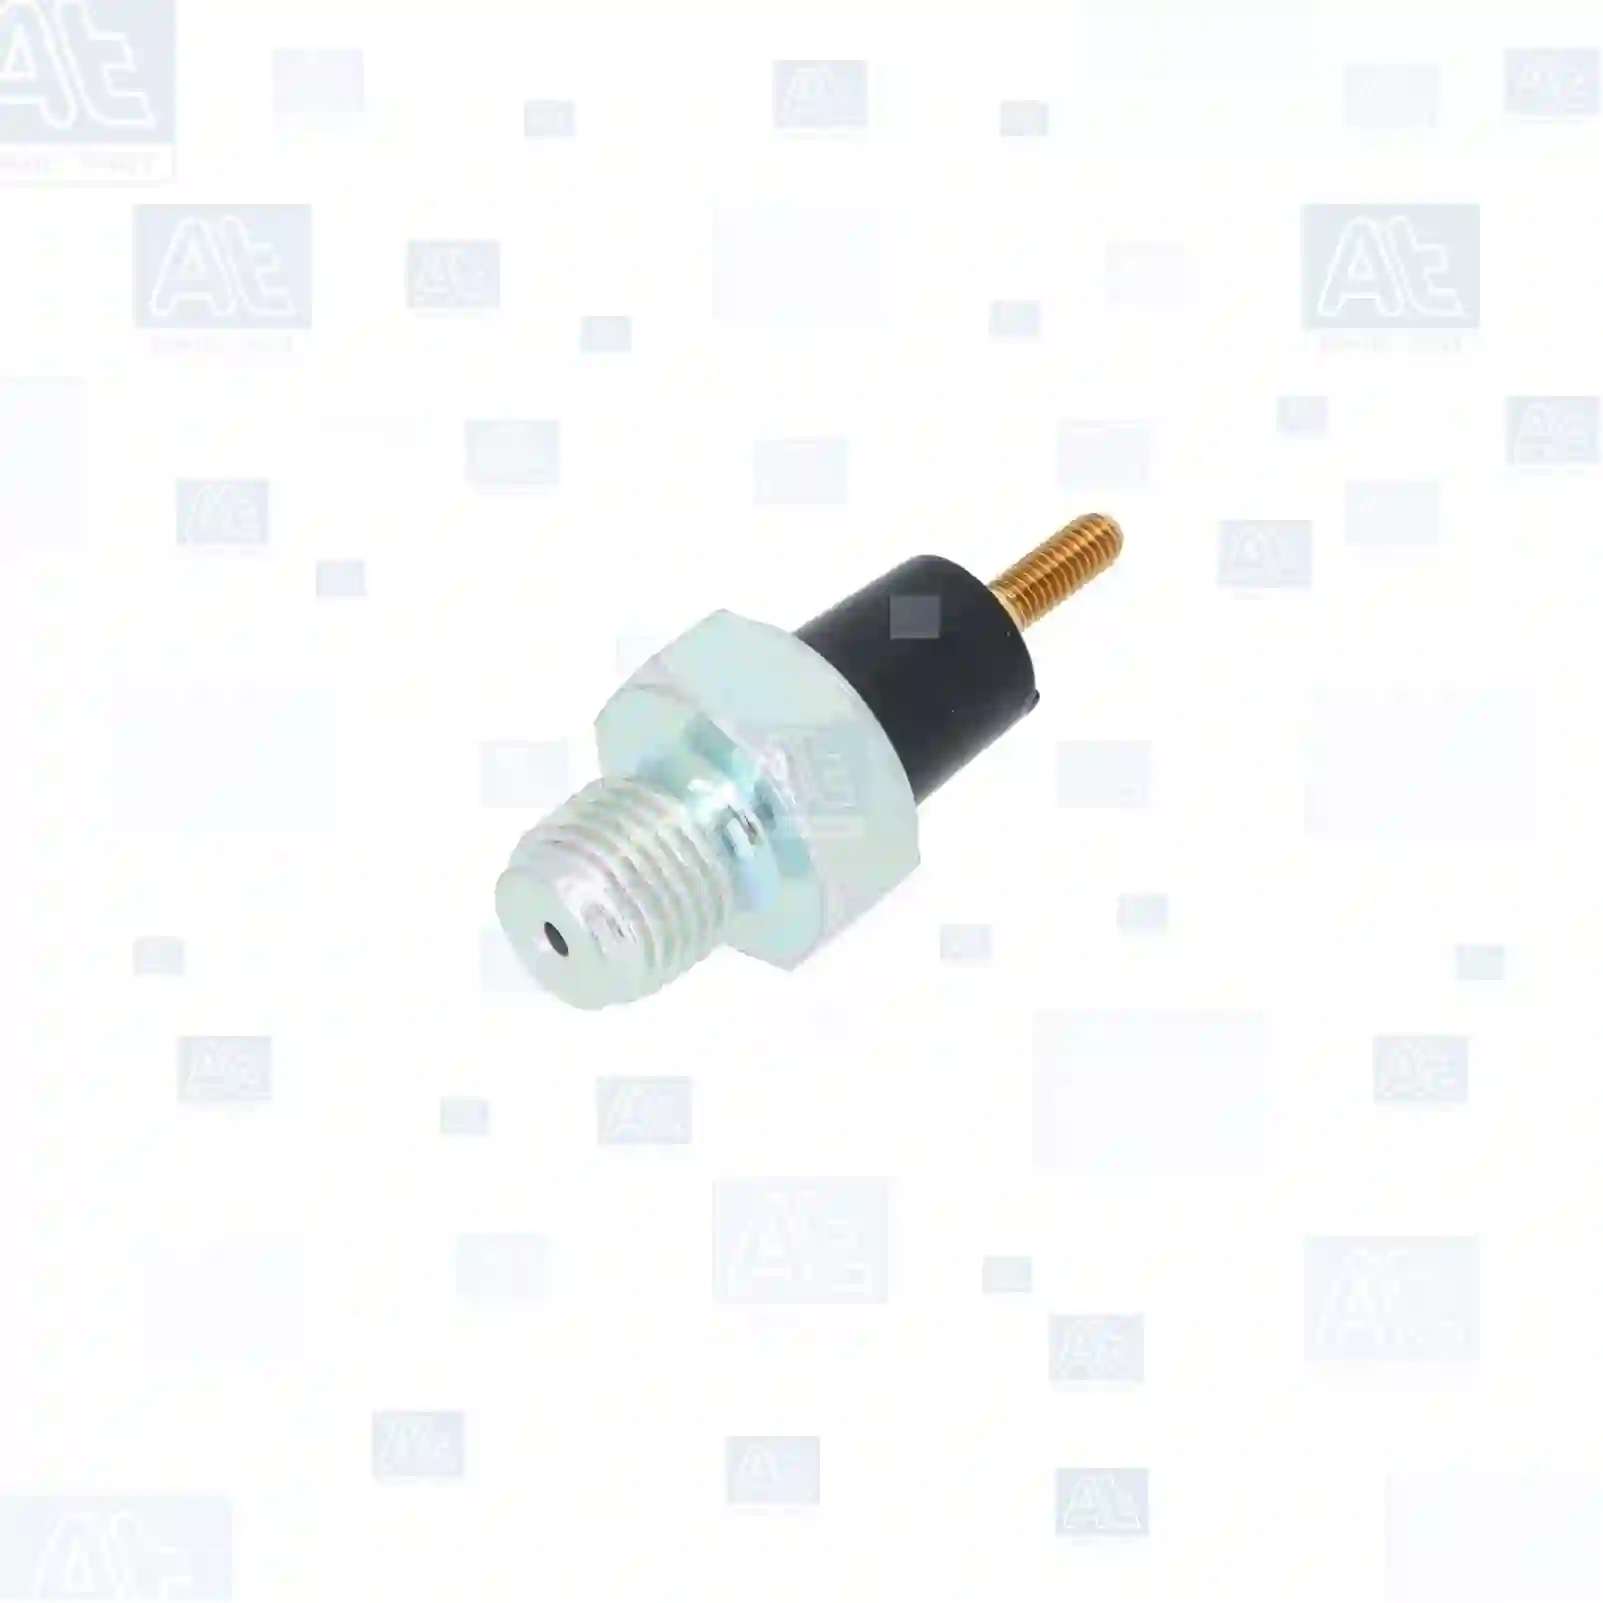 Oil pressure switch, 77703241, 1027970, 1066811, 1414897, 1647828, 1652872, 3466716, 409160, 6062916, 6080608, 6086163, 6153125, 6170902, 6499475, 6513125, 6539971, 6716335, 6716355, 73151, 81AB-9278-AA, 81AE-9278-BA, 86AB-9278-BA, 90AB-9278-AB, 92BB-9278-BB, 1E0018501, 1E0018501A, 1E1018501, C20118501, 50590 ||  77703241 At Spare Part | Engine, Accelerator Pedal, Camshaft, Connecting Rod, Crankcase, Crankshaft, Cylinder Head, Engine Suspension Mountings, Exhaust Manifold, Exhaust Gas Recirculation, Filter Kits, Flywheel Housing, General Overhaul Kits, Engine, Intake Manifold, Oil Cleaner, Oil Cooler, Oil Filter, Oil Pump, Oil Sump, Piston & Liner, Sensor & Switch, Timing Case, Turbocharger, Cooling System, Belt Tensioner, Coolant Filter, Coolant Pipe, Corrosion Prevention Agent, Drive, Expansion Tank, Fan, Intercooler, Monitors & Gauges, Radiator, Thermostat, V-Belt / Timing belt, Water Pump, Fuel System, Electronical Injector Unit, Feed Pump, Fuel Filter, cpl., Fuel Gauge Sender,  Fuel Line, Fuel Pump, Fuel Tank, Injection Line Kit, Injection Pump, Exhaust System, Clutch & Pedal, Gearbox, Propeller Shaft, Axles, Brake System, Hubs & Wheels, Suspension, Leaf Spring, Universal Parts / Accessories, Steering, Electrical System, Cabin Oil pressure switch, 77703241, 1027970, 1066811, 1414897, 1647828, 1652872, 3466716, 409160, 6062916, 6080608, 6086163, 6153125, 6170902, 6499475, 6513125, 6539971, 6716335, 6716355, 73151, 81AB-9278-AA, 81AE-9278-BA, 86AB-9278-BA, 90AB-9278-AB, 92BB-9278-BB, 1E0018501, 1E0018501A, 1E1018501, C20118501, 50590 ||  77703241 At Spare Part | Engine, Accelerator Pedal, Camshaft, Connecting Rod, Crankcase, Crankshaft, Cylinder Head, Engine Suspension Mountings, Exhaust Manifold, Exhaust Gas Recirculation, Filter Kits, Flywheel Housing, General Overhaul Kits, Engine, Intake Manifold, Oil Cleaner, Oil Cooler, Oil Filter, Oil Pump, Oil Sump, Piston & Liner, Sensor & Switch, Timing Case, Turbocharger, Cooling System, Belt Tensioner, Coolant Filter, Coolant Pipe, Corrosion Prevention Agent, Drive, Expansion Tank, Fan, Intercooler, Monitors & Gauges, Radiator, Thermostat, V-Belt / Timing belt, Water Pump, Fuel System, Electronical Injector Unit, Feed Pump, Fuel Filter, cpl., Fuel Gauge Sender,  Fuel Line, Fuel Pump, Fuel Tank, Injection Line Kit, Injection Pump, Exhaust System, Clutch & Pedal, Gearbox, Propeller Shaft, Axles, Brake System, Hubs & Wheels, Suspension, Leaf Spring, Universal Parts / Accessories, Steering, Electrical System, Cabin